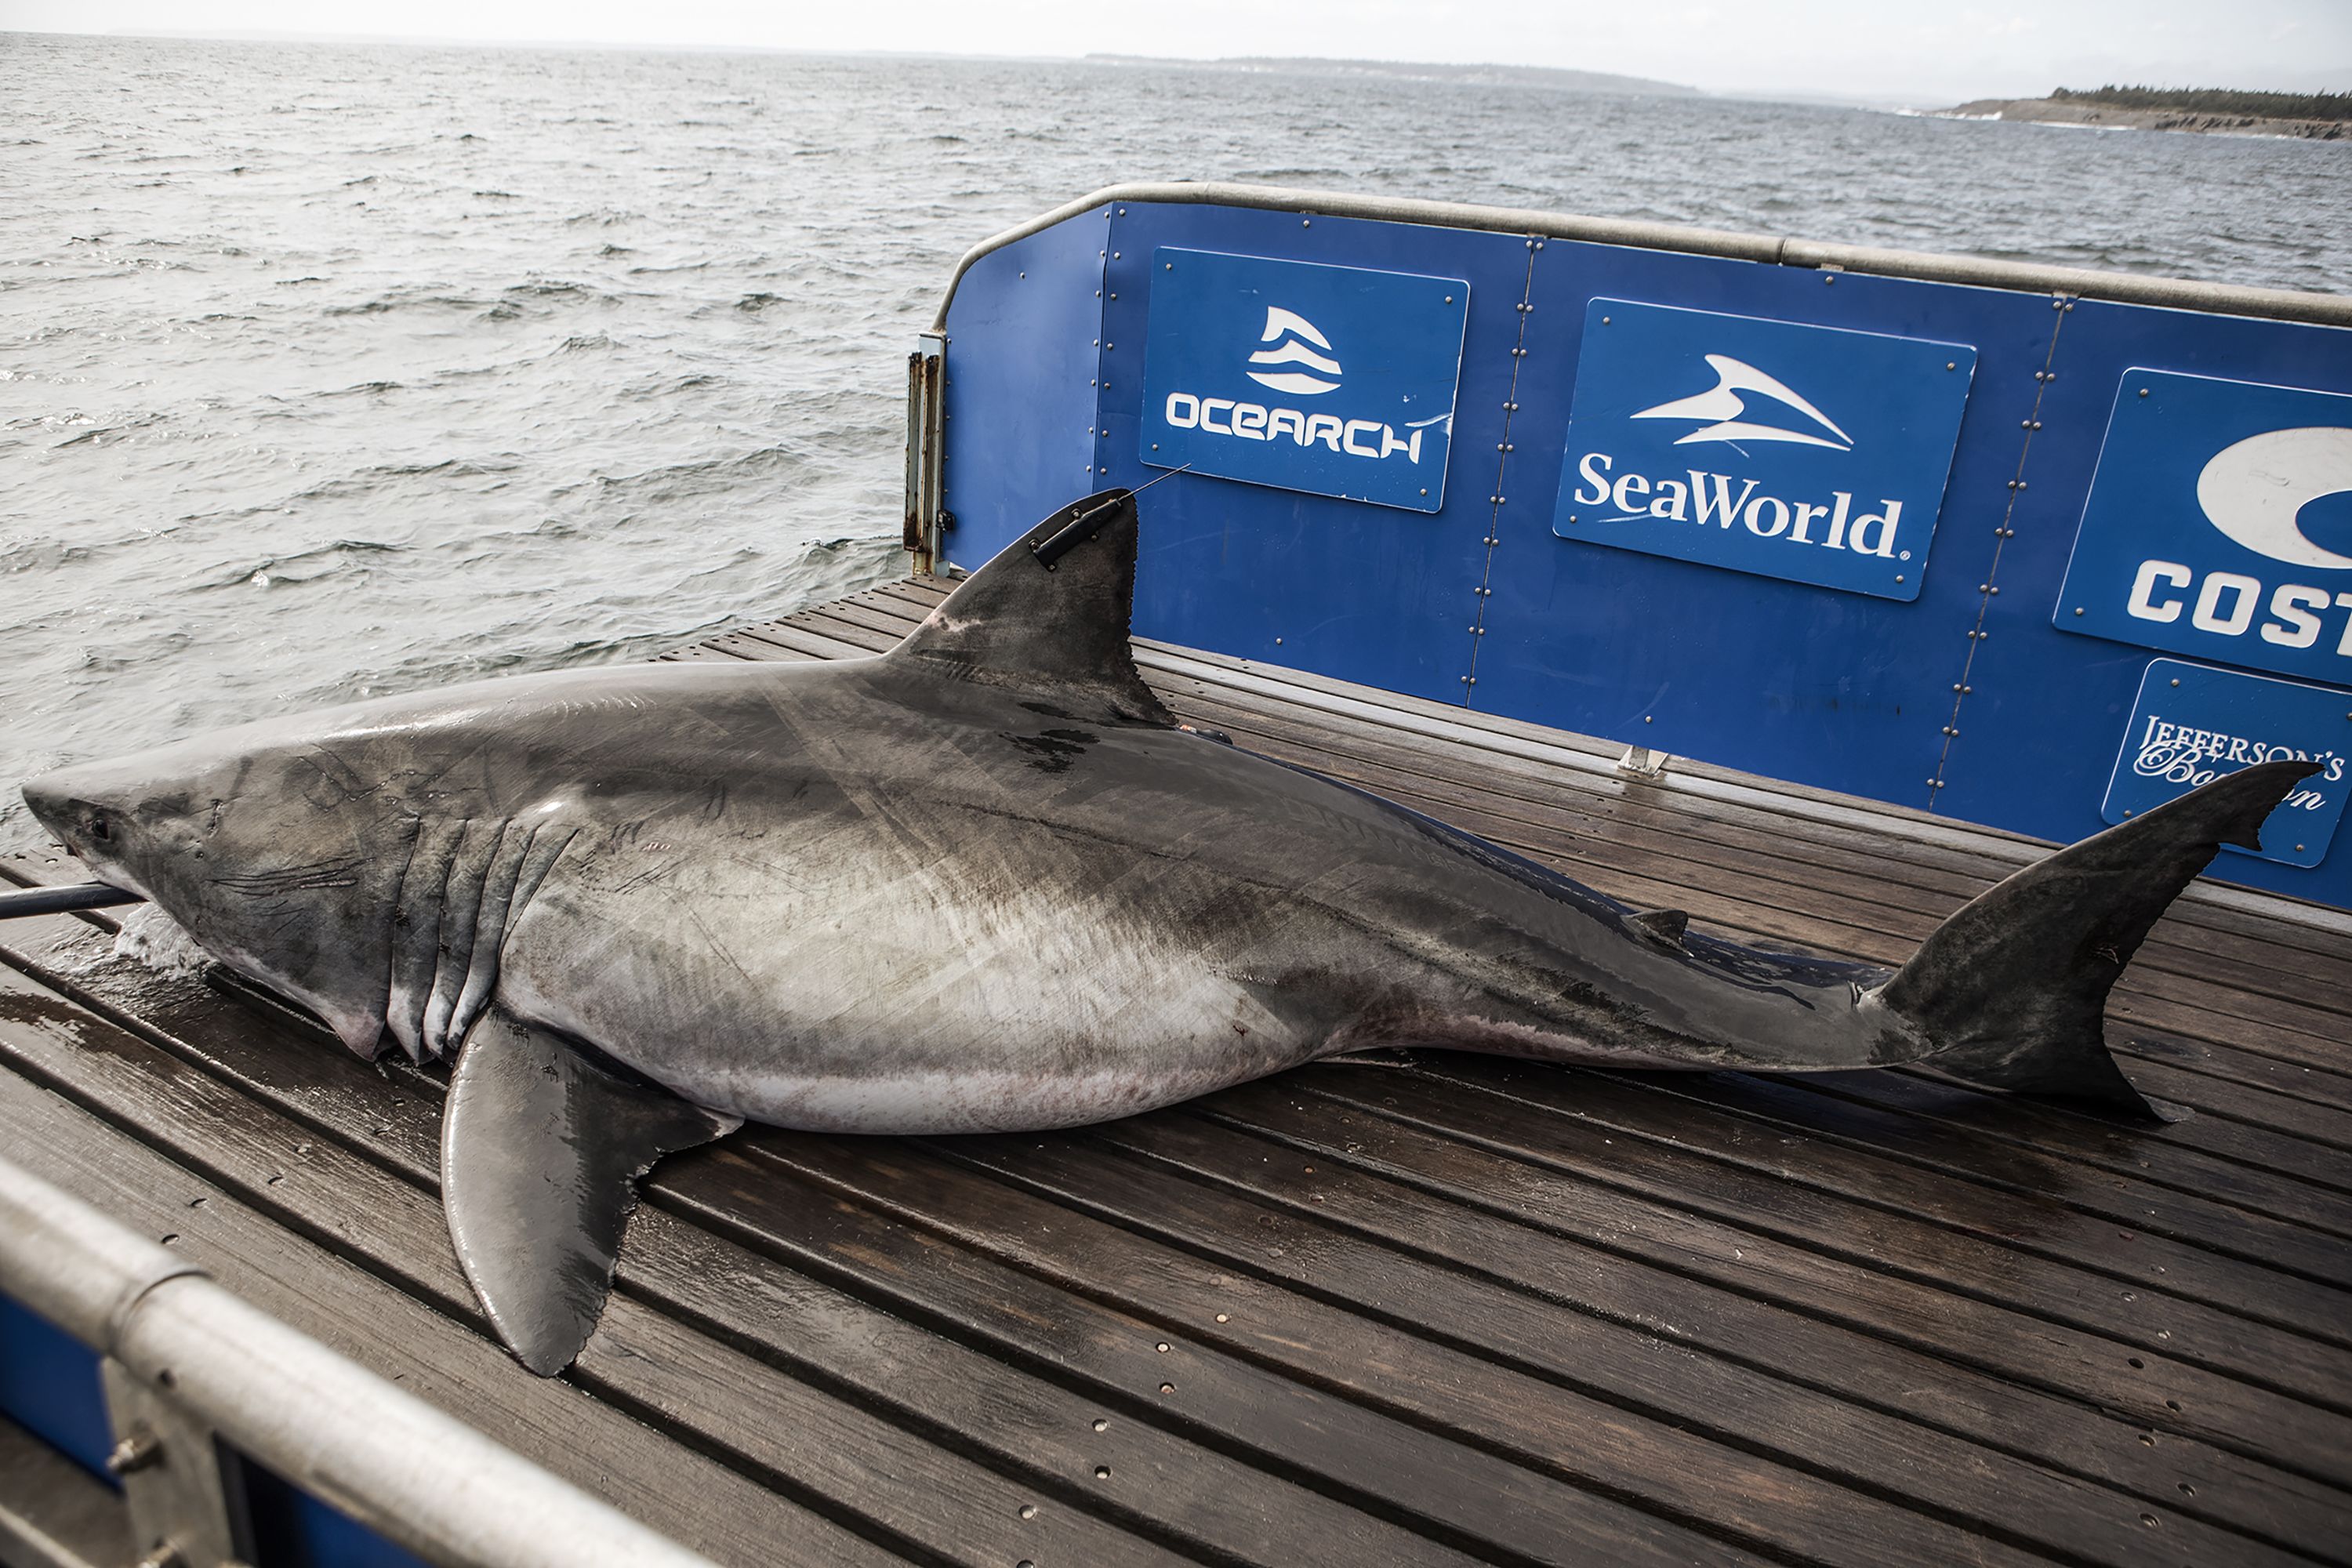 Meet Scot, the 1,600-pound great white shark swimming off